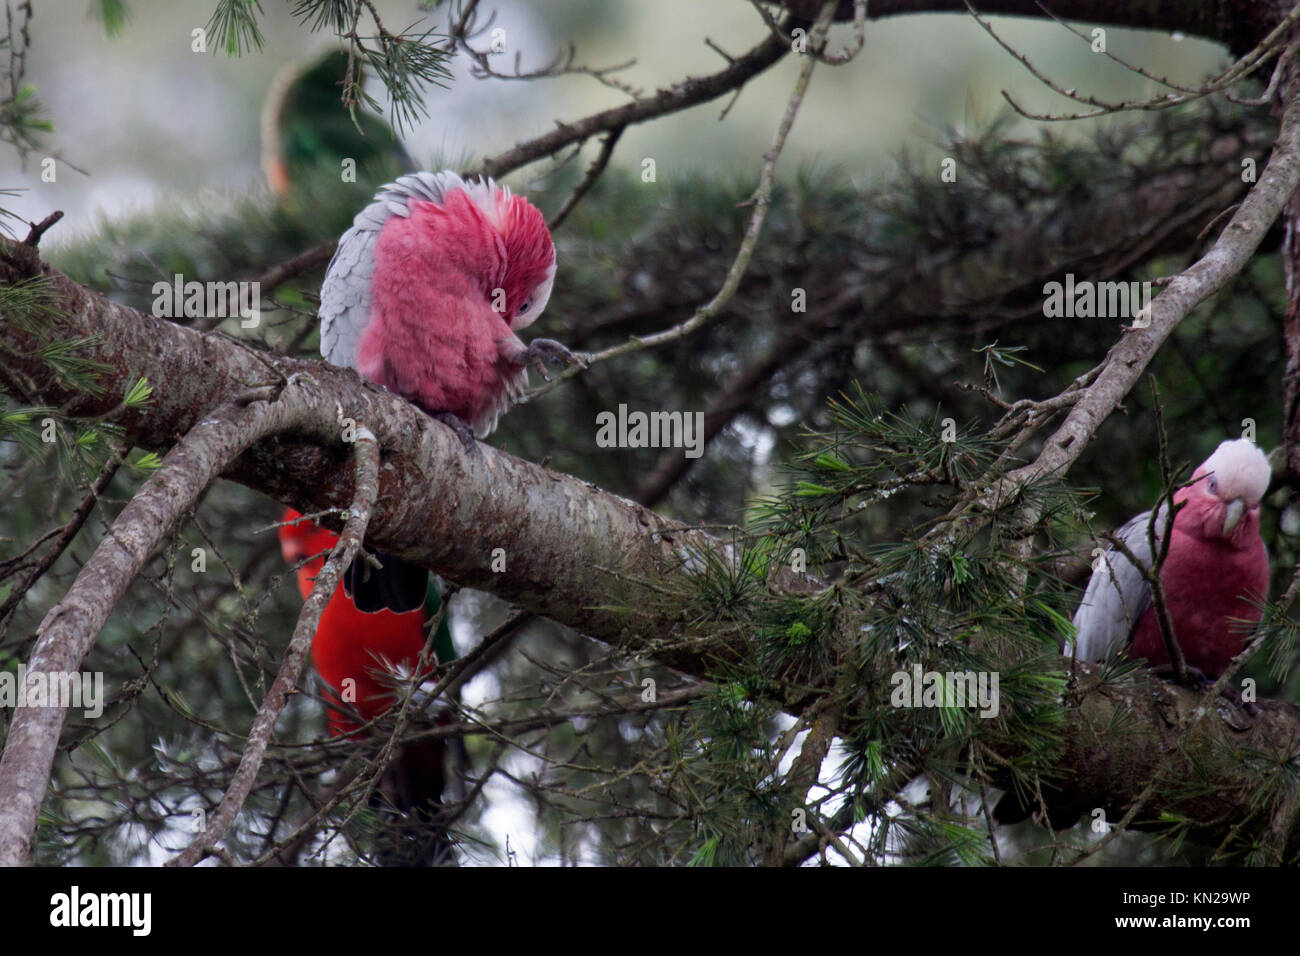 Galah perched on bough of tree in Victoria Australia Stock Photo